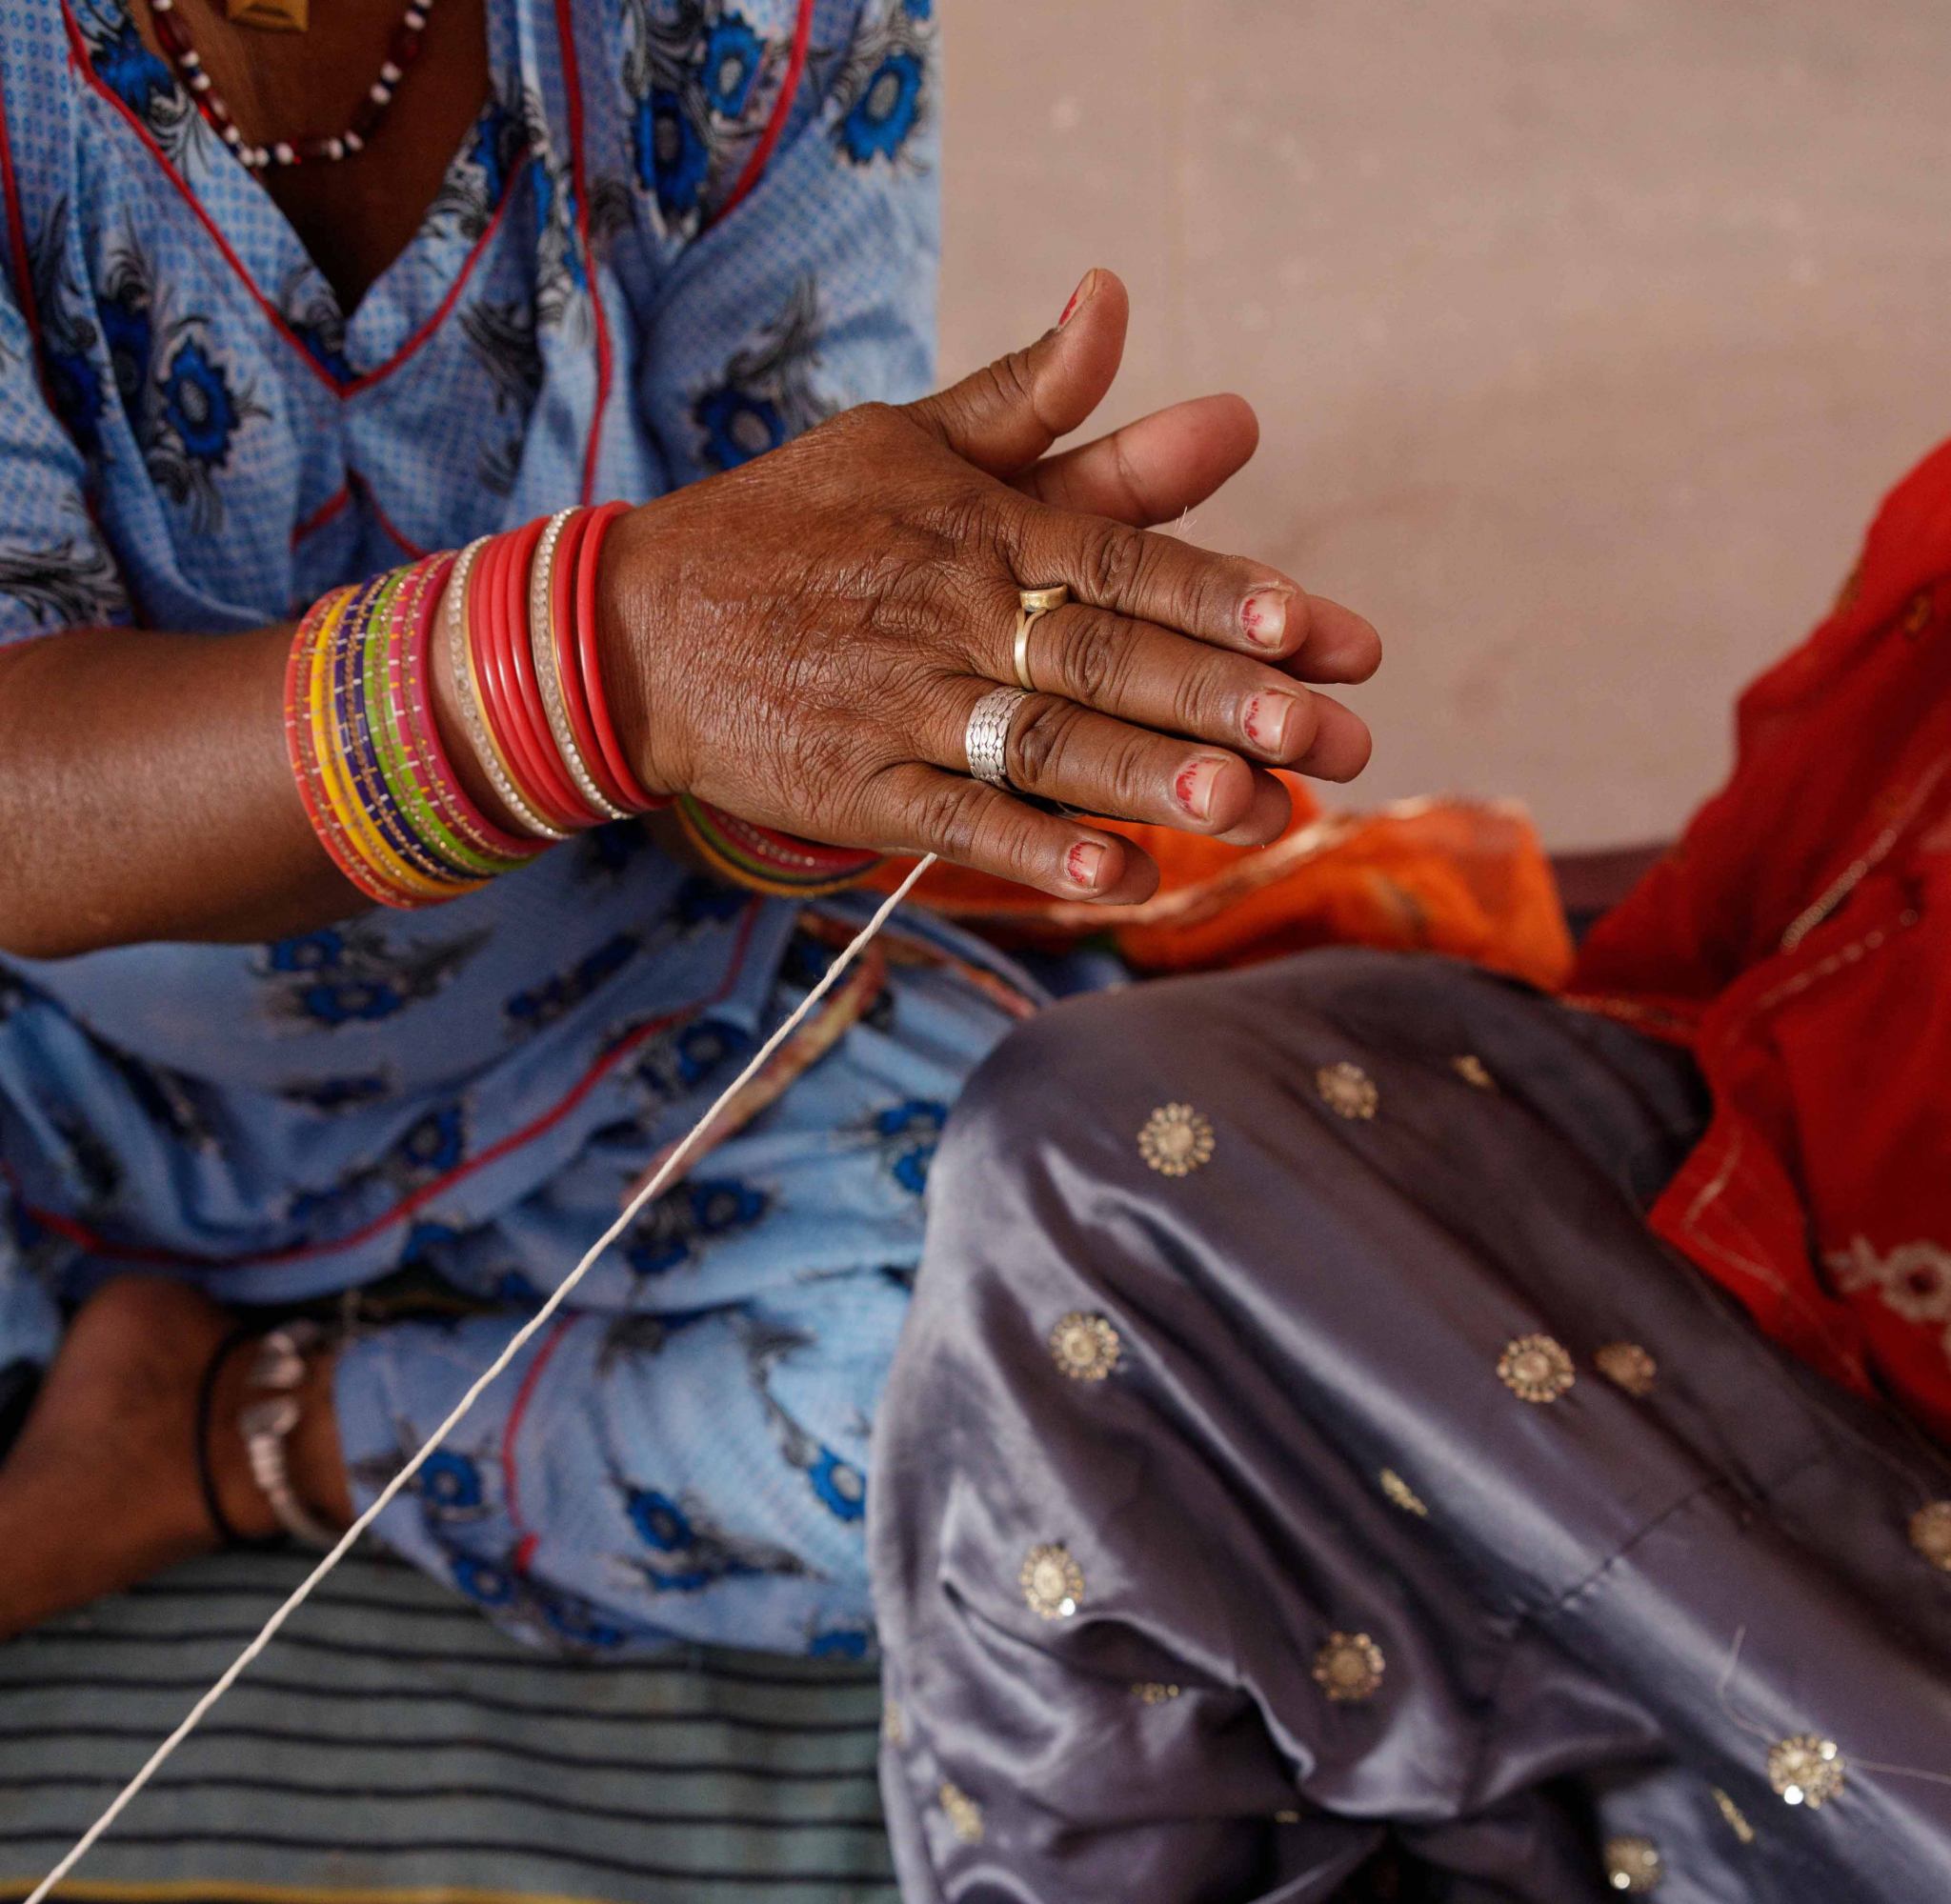 
"Saheli Women artisan skillfully threading fabric, showcasing her craftsmanship and dedication to traditional techniques."